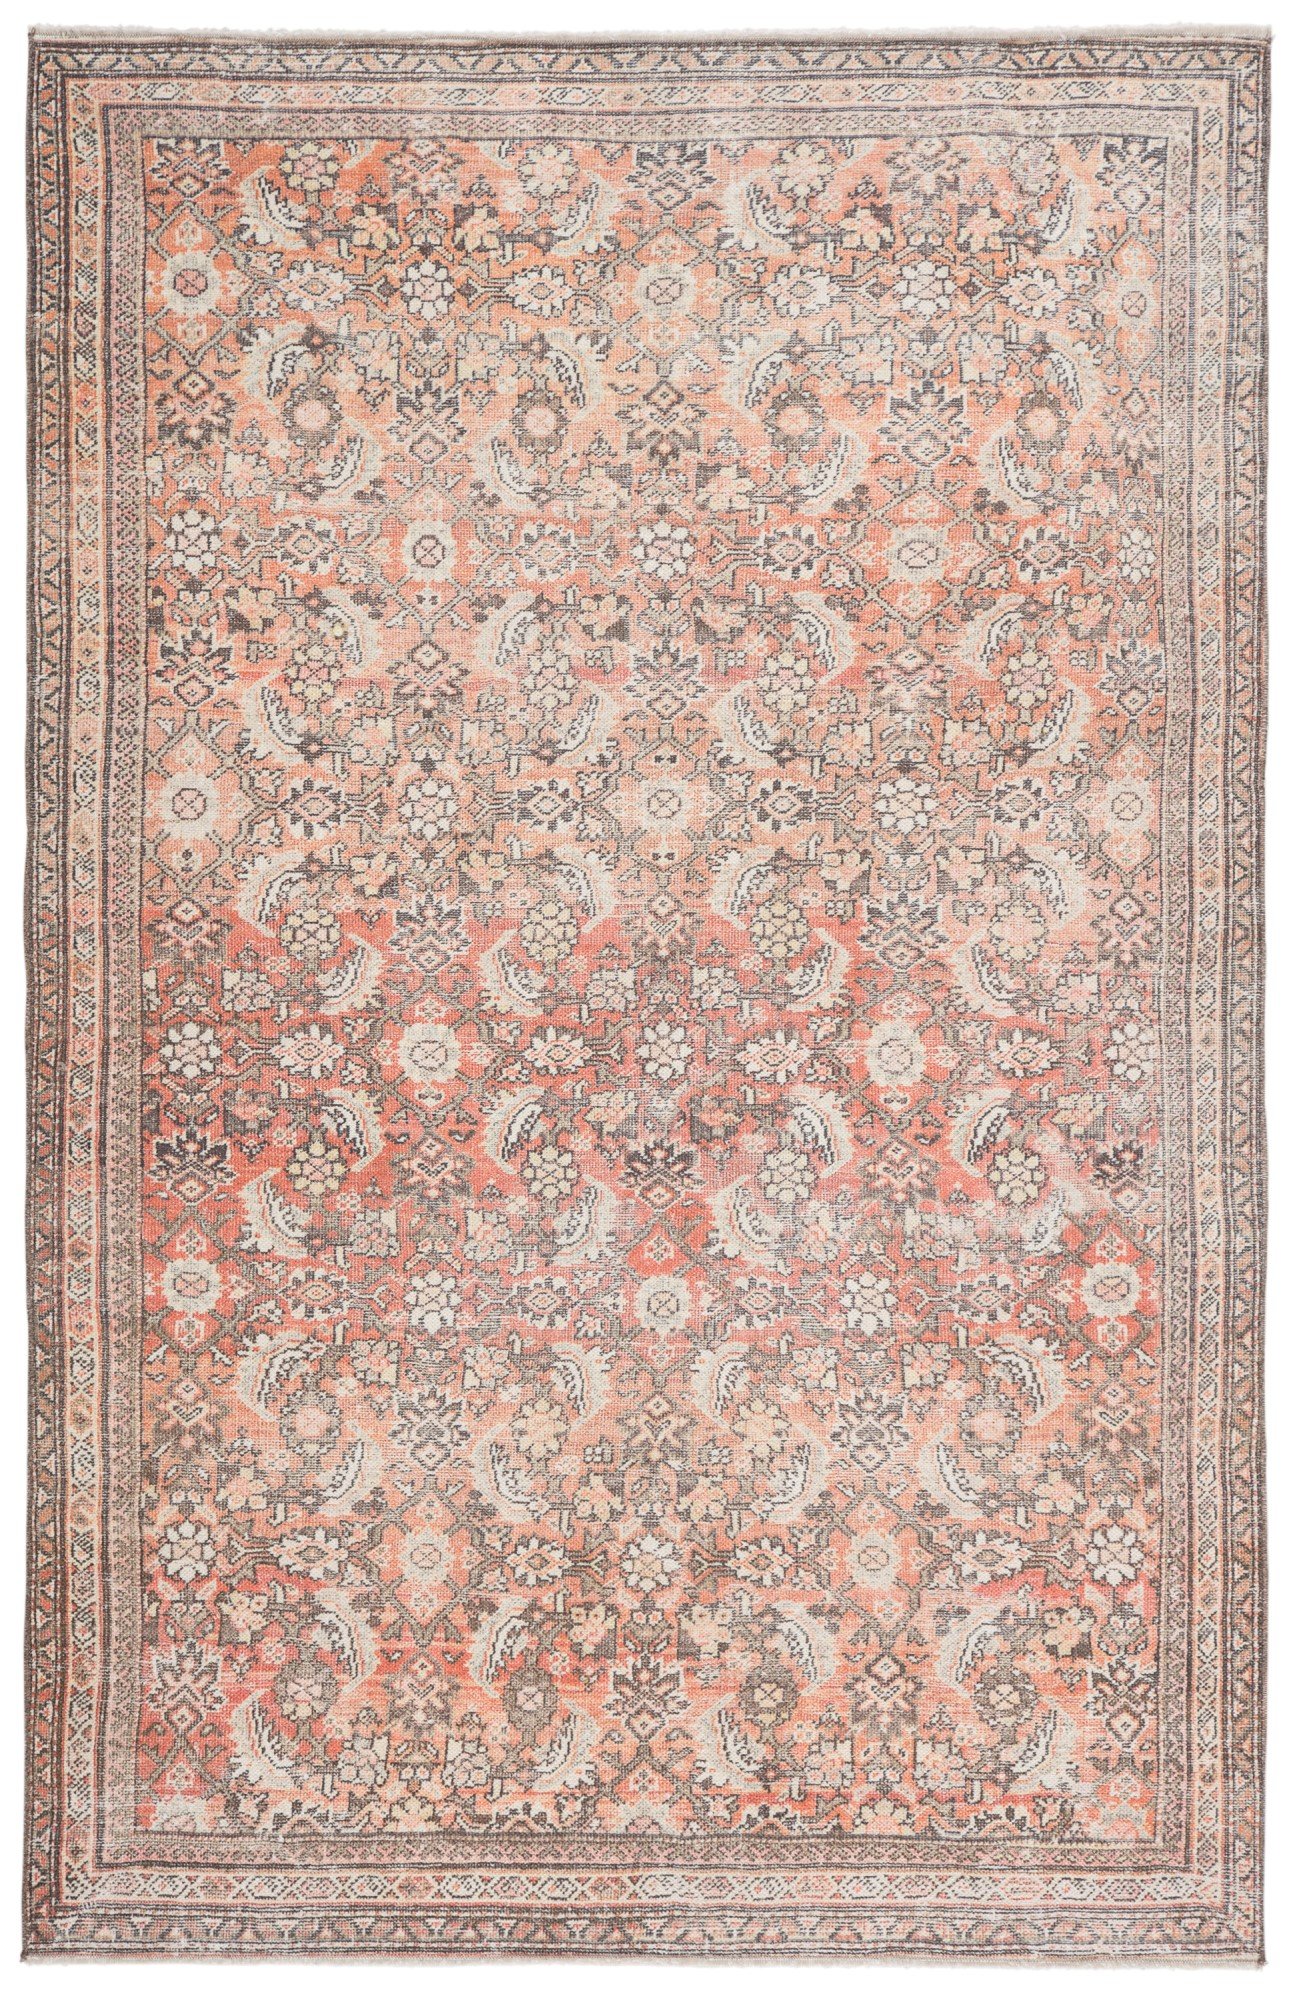 Orange Area Rugs To Match Your Style, Pink 8×10 Rug